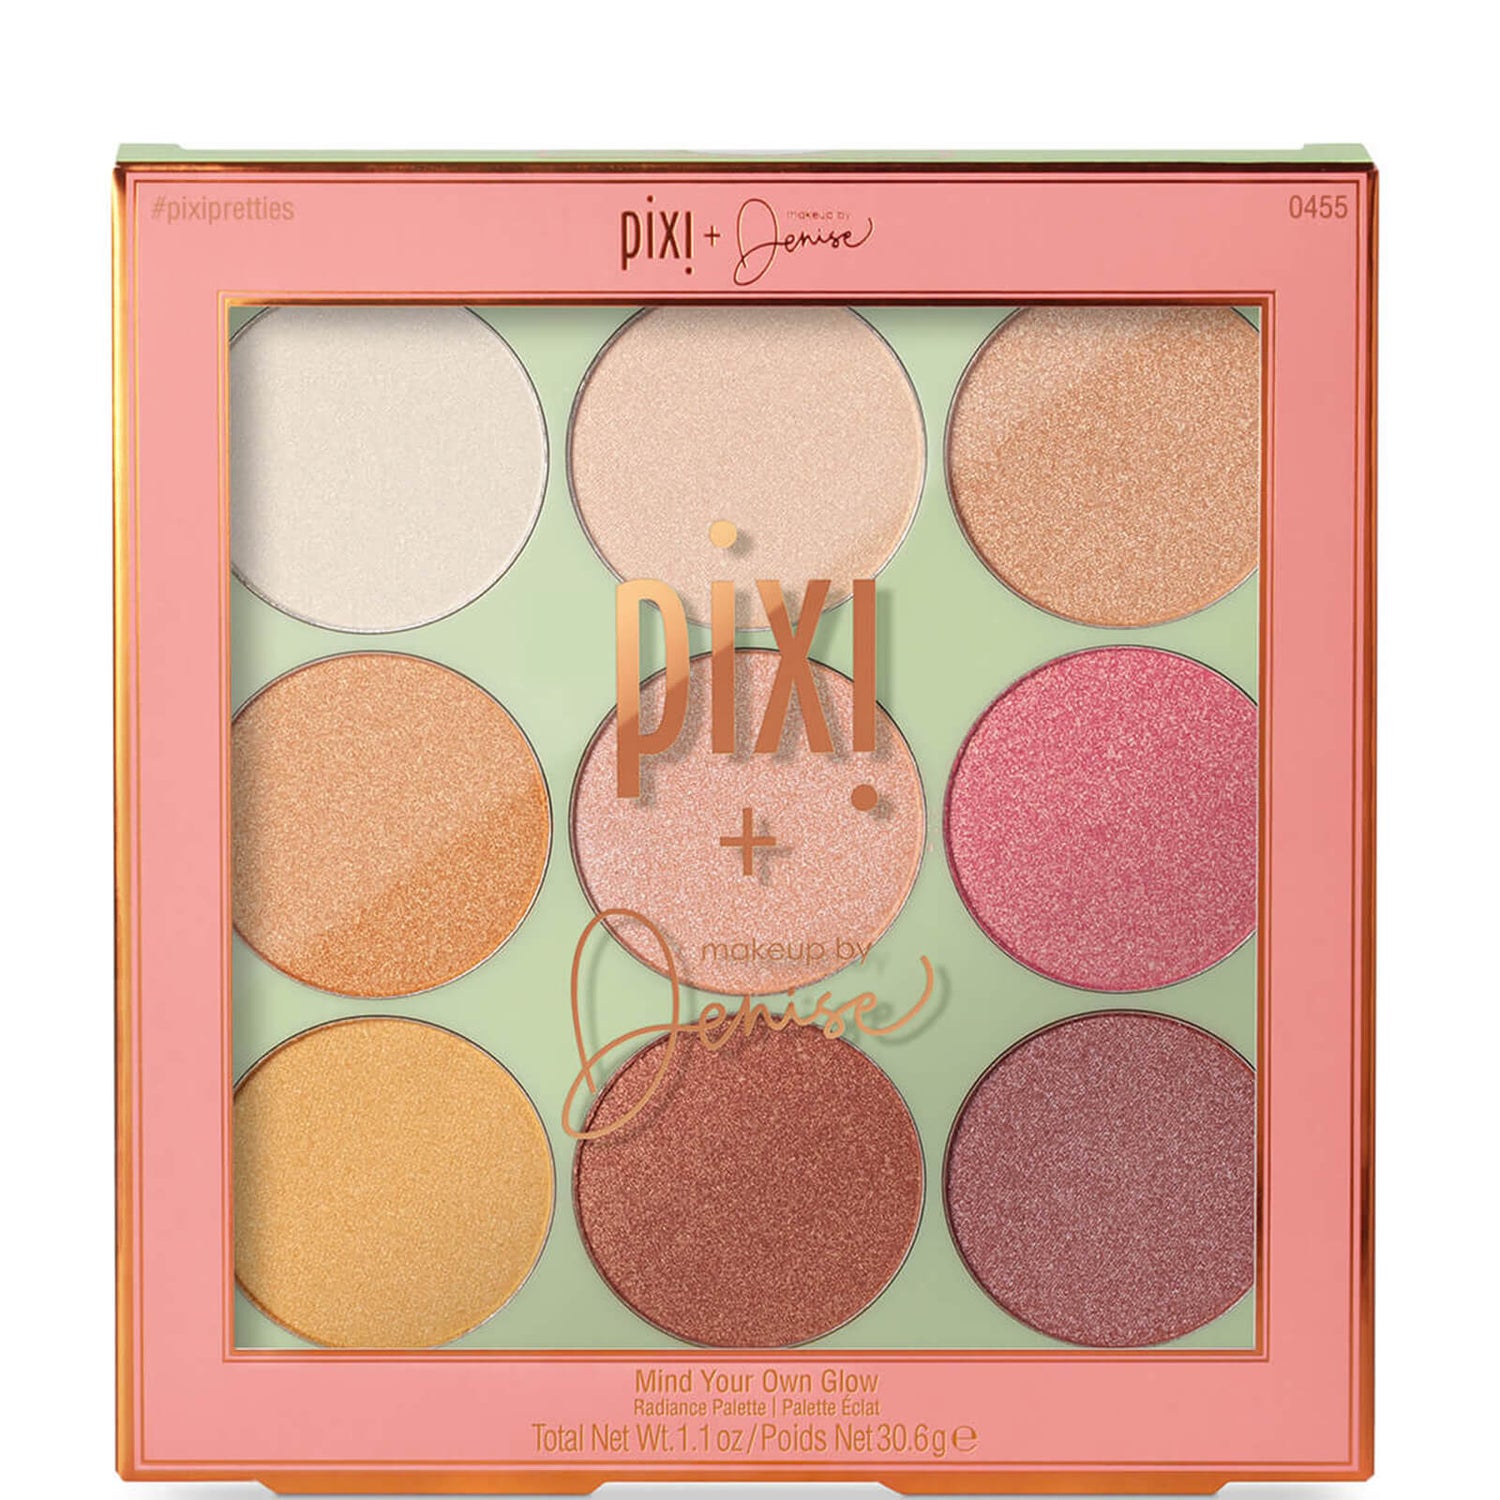 PIXI + Denise Collaboration Mind Your Own Glow Radiance Palette